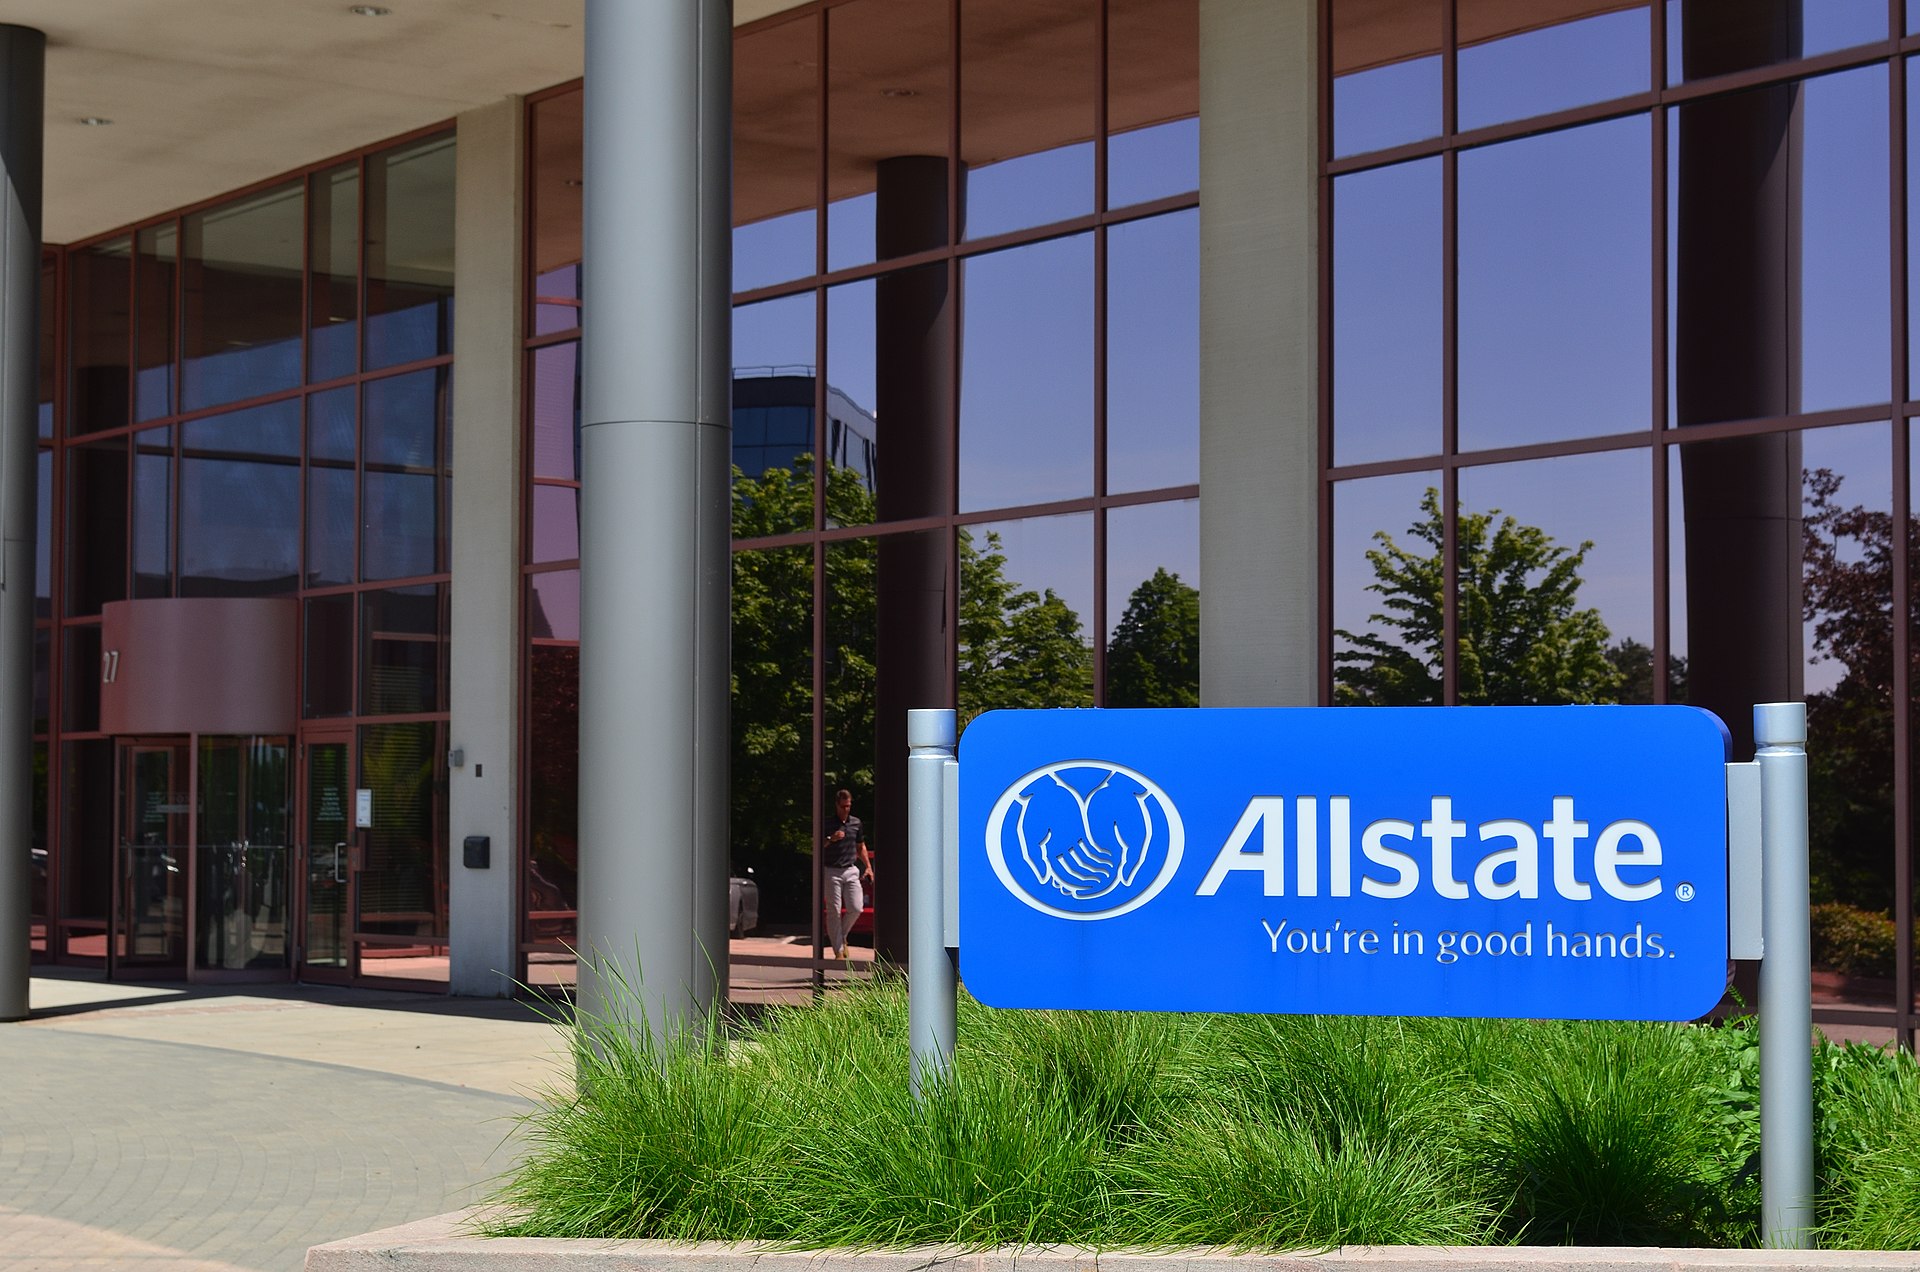 We see an Allstate sign outside of a large building.